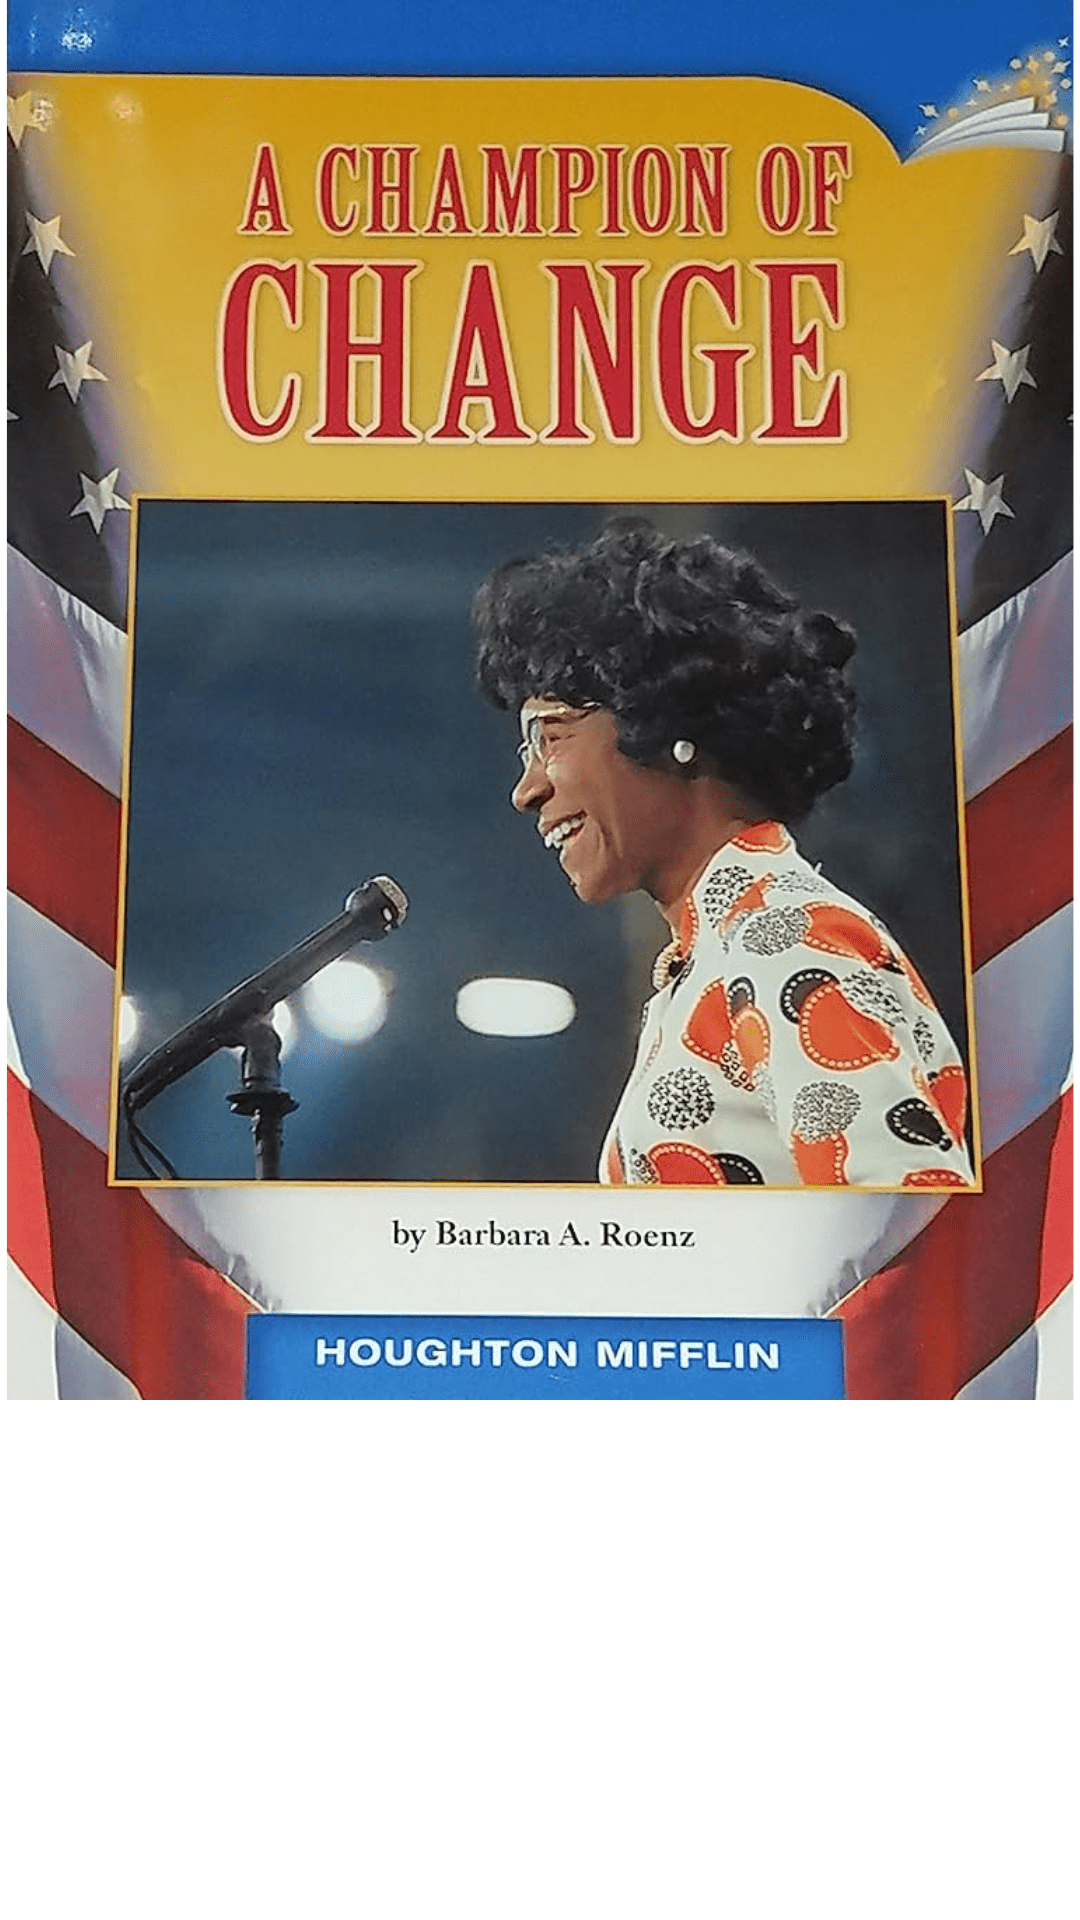 A Champion of Change by Barbara A. Roenz